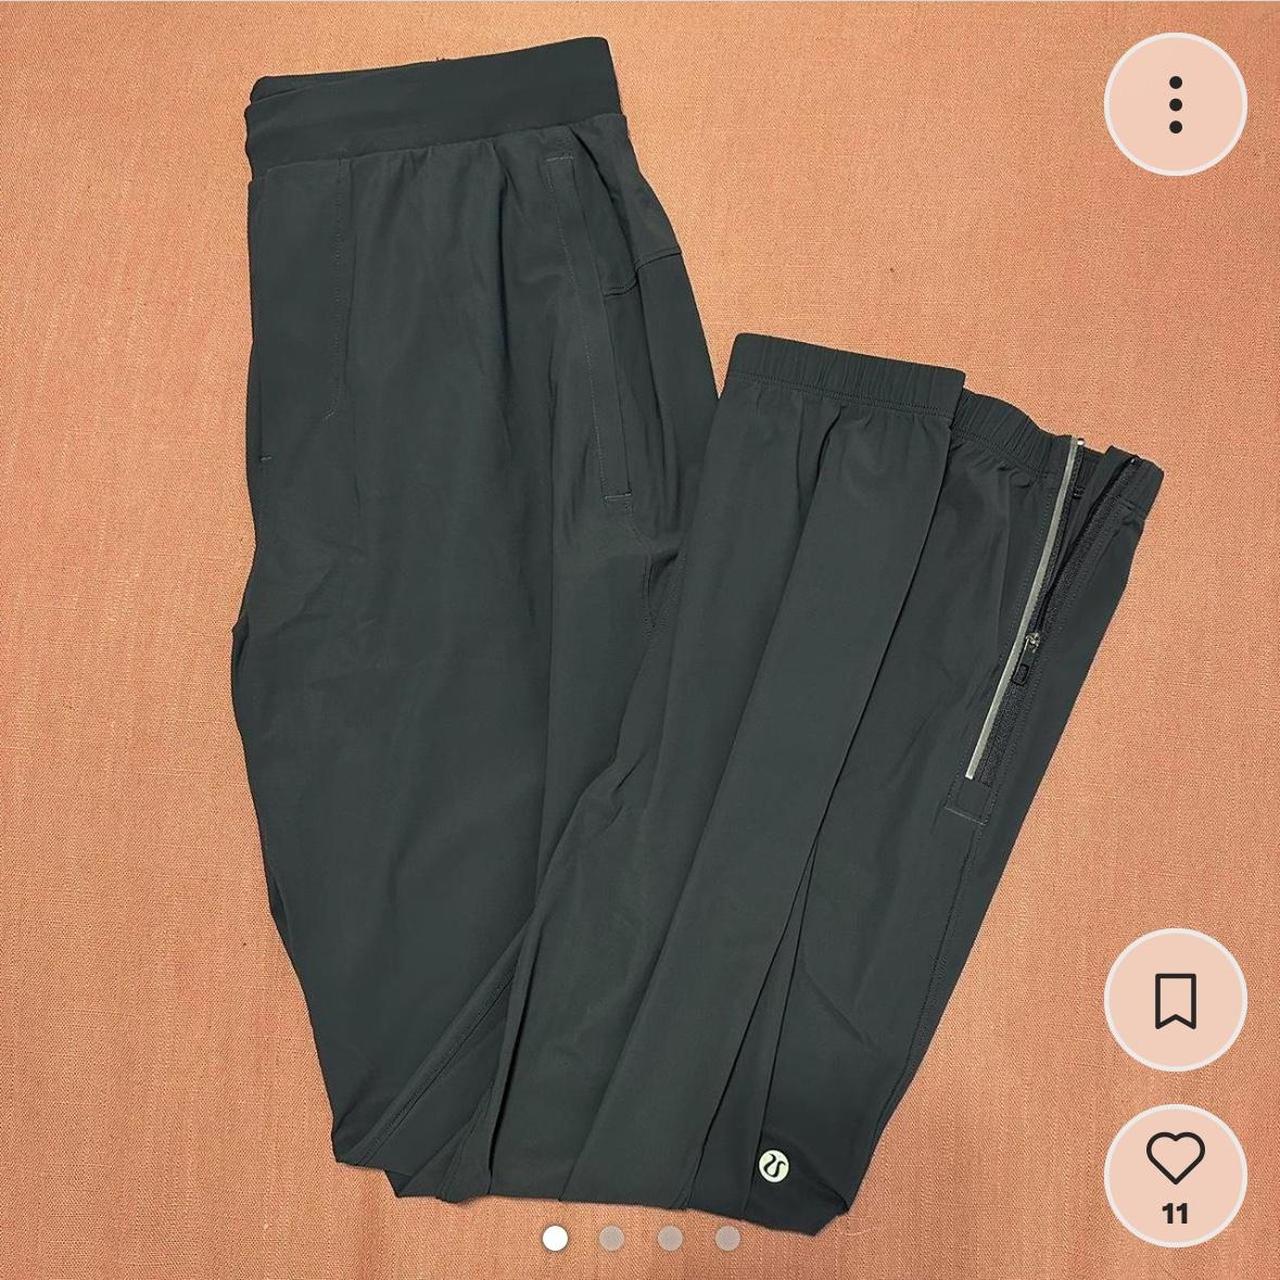 Lululemon Men's Surge Jogger Various Color and Size New with Tag